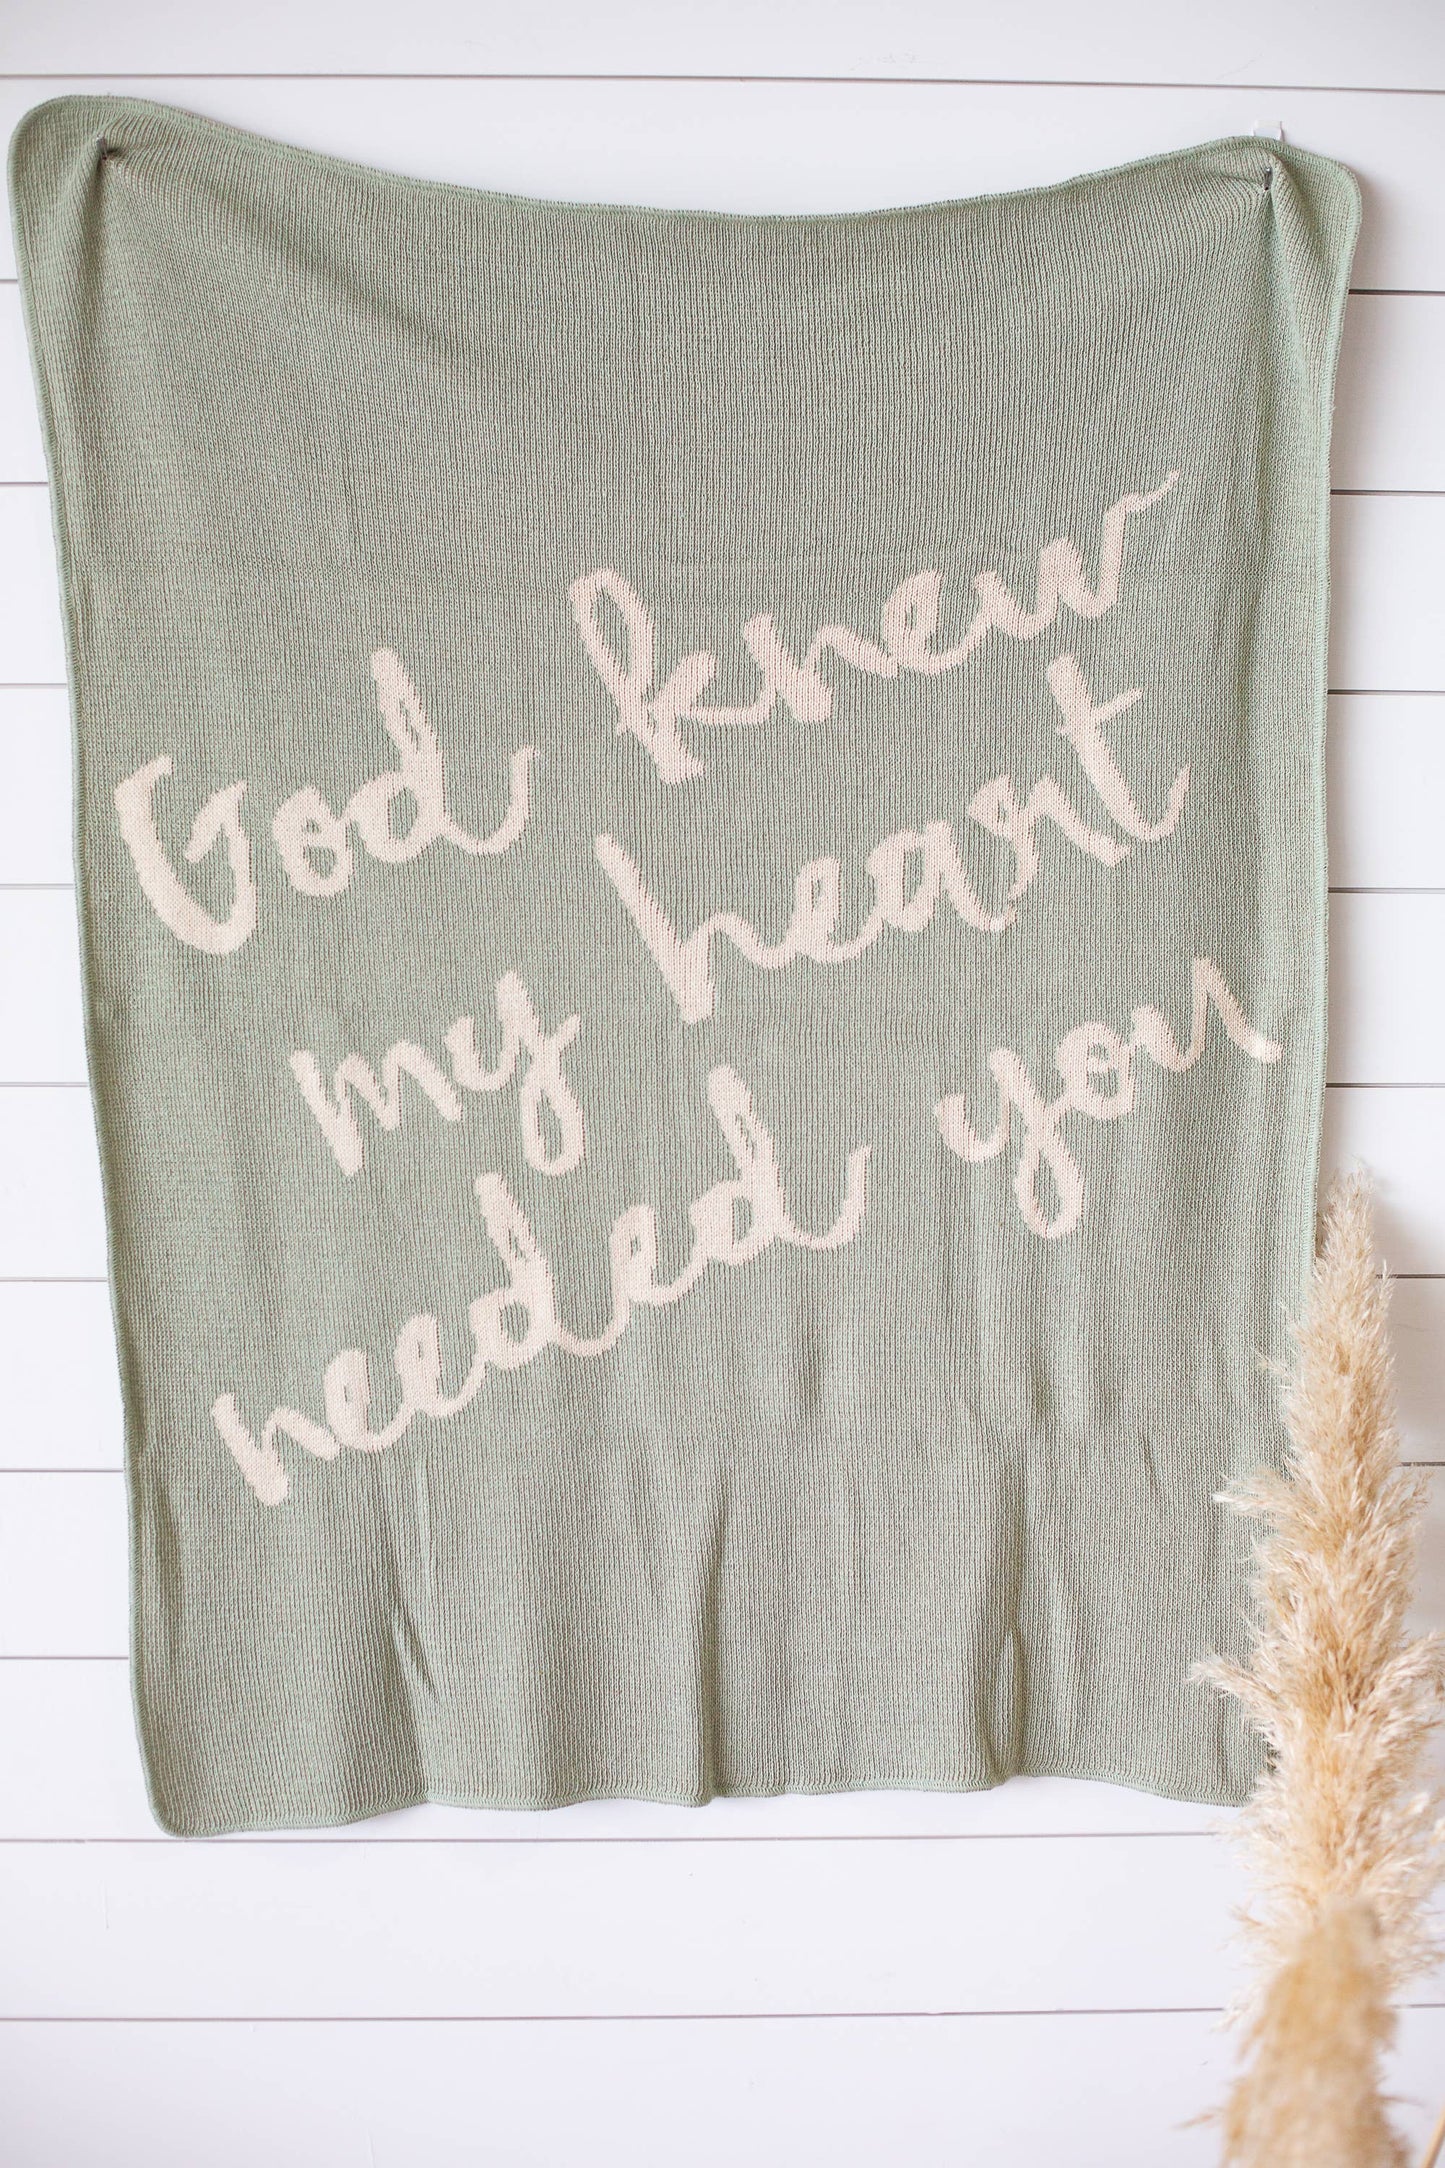 Made in the USA | God Knew My Heart Needed You Throw